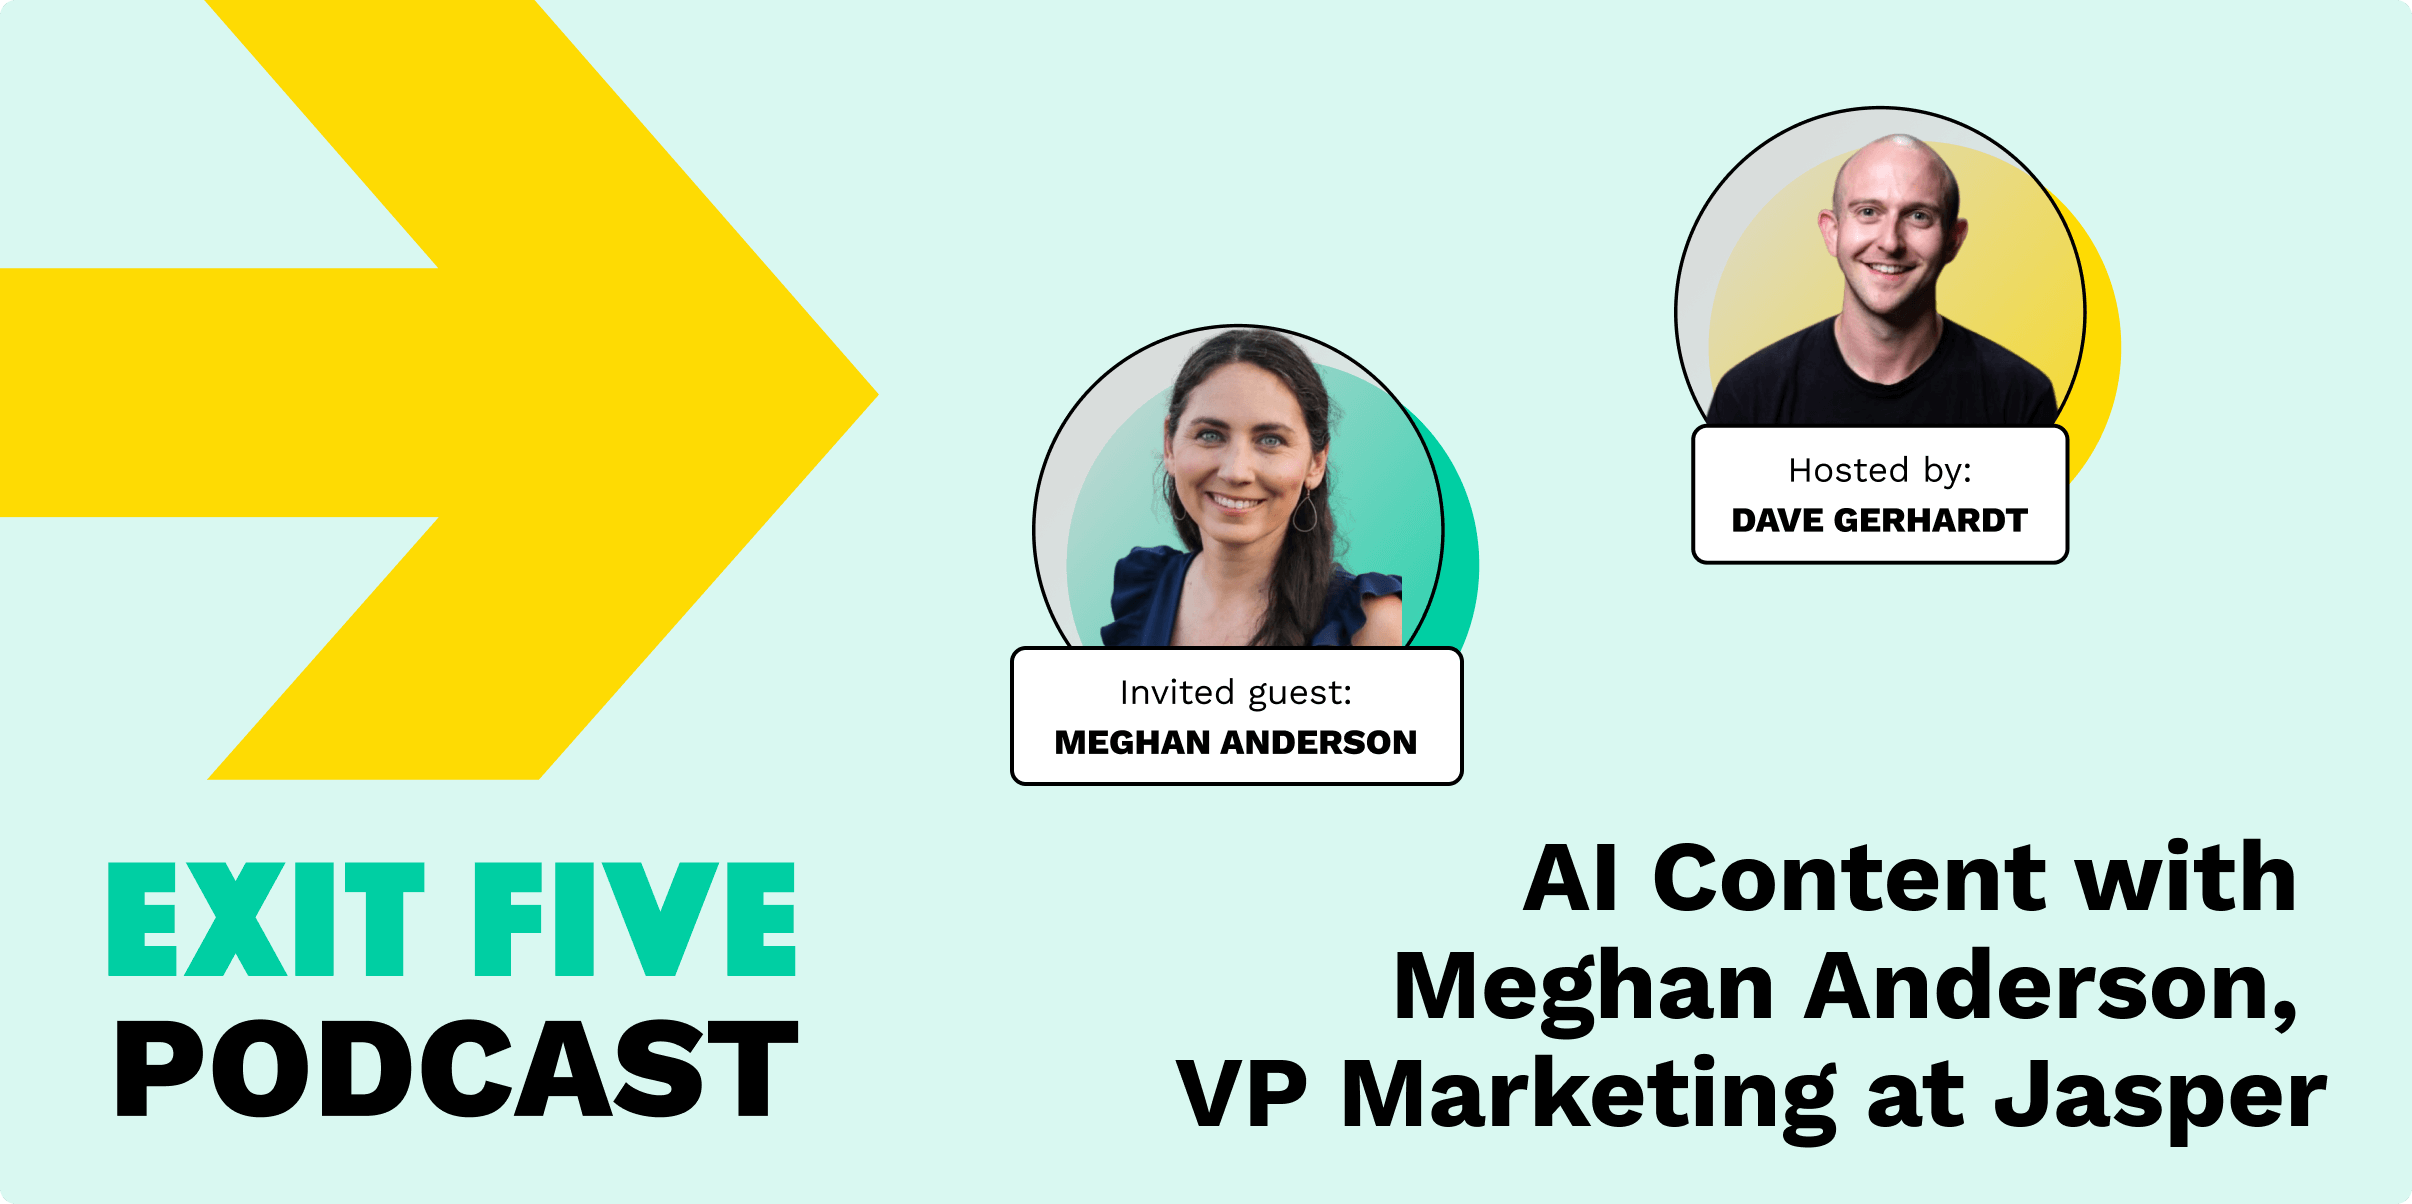 AI Content with Meghan Anderson, VP Marketing at Jasper